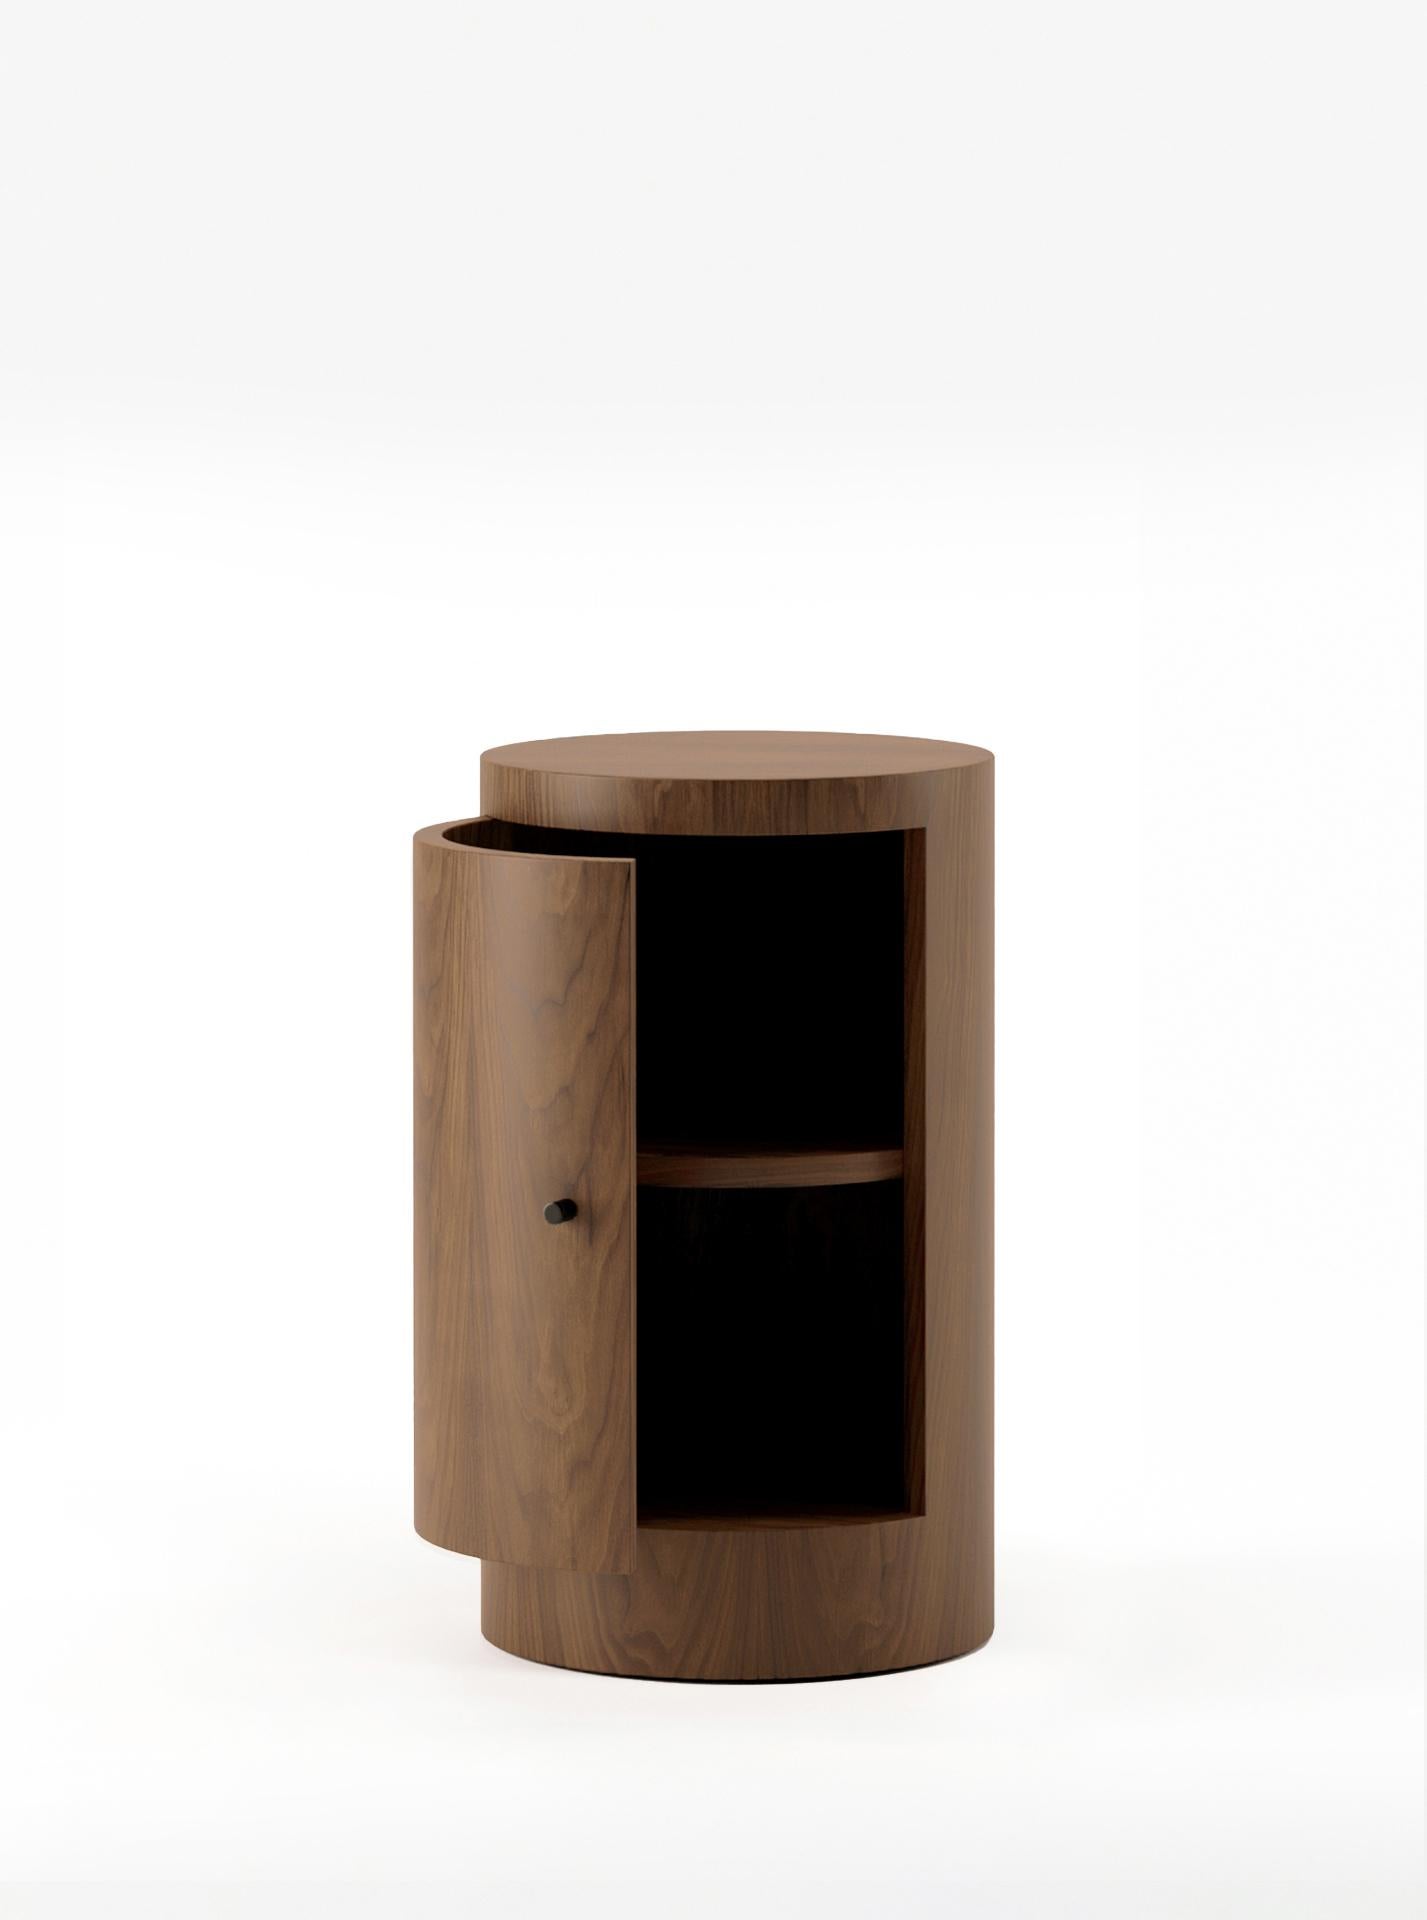 Minimalist Pair of Constant Night Stands in Walnut by Master Studio for Lemon For Sale